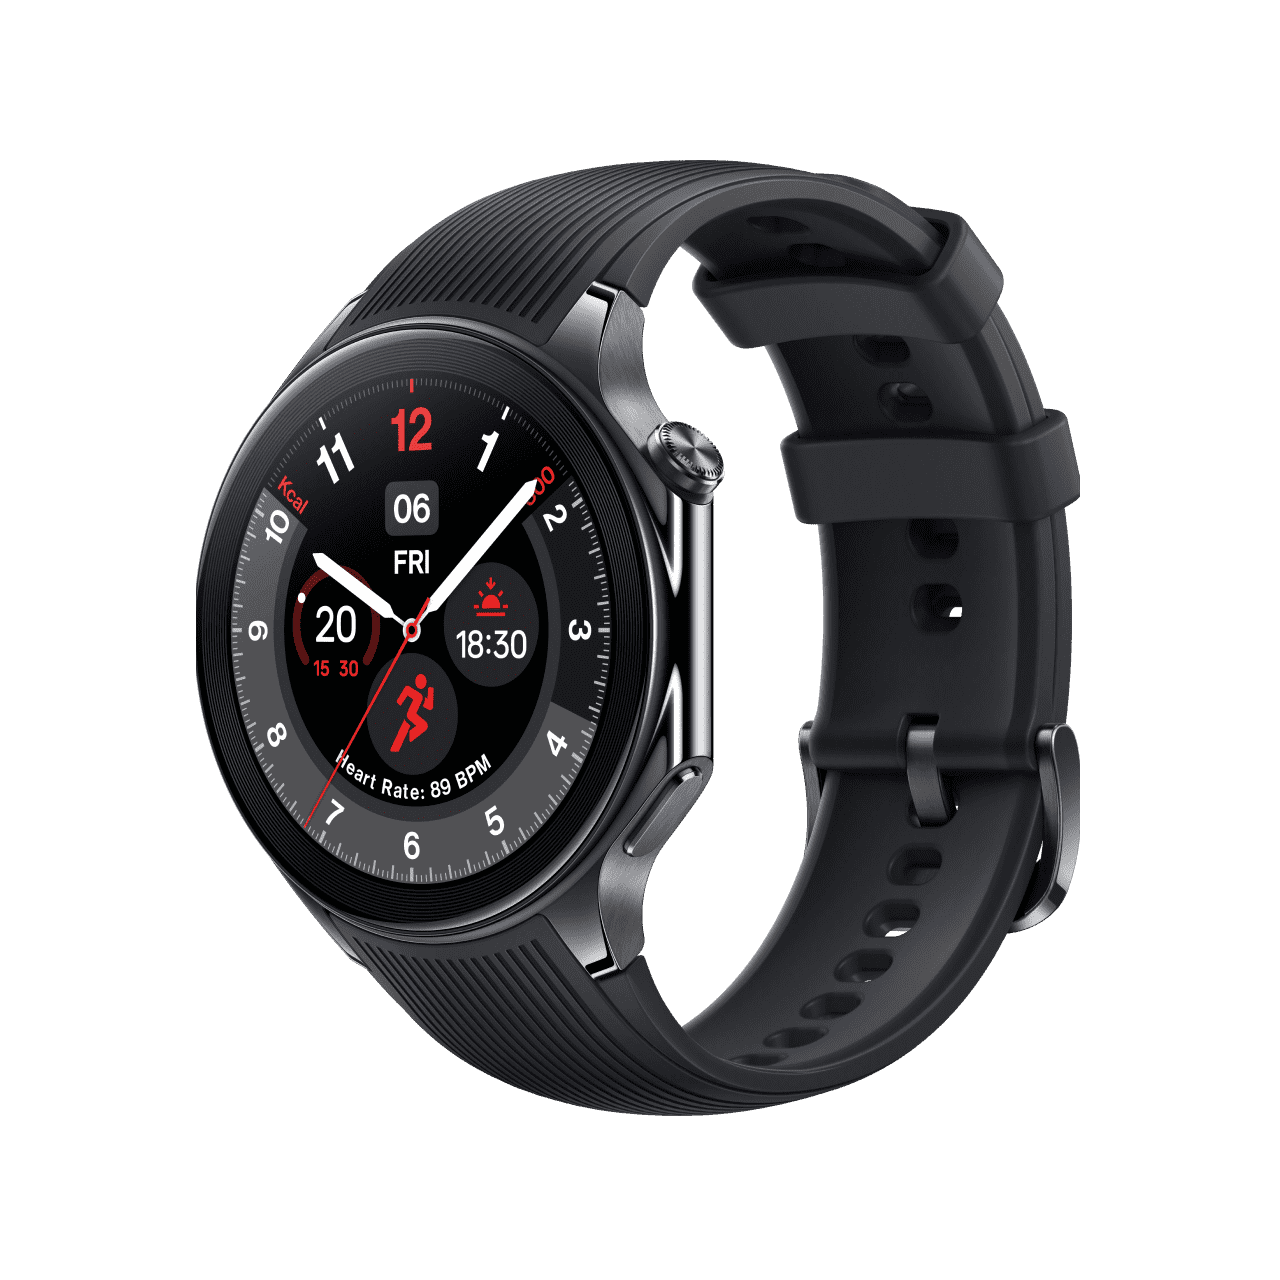 Wear OS “Hybrid” design has two OSes, two CPUs, “100 hour” battery life